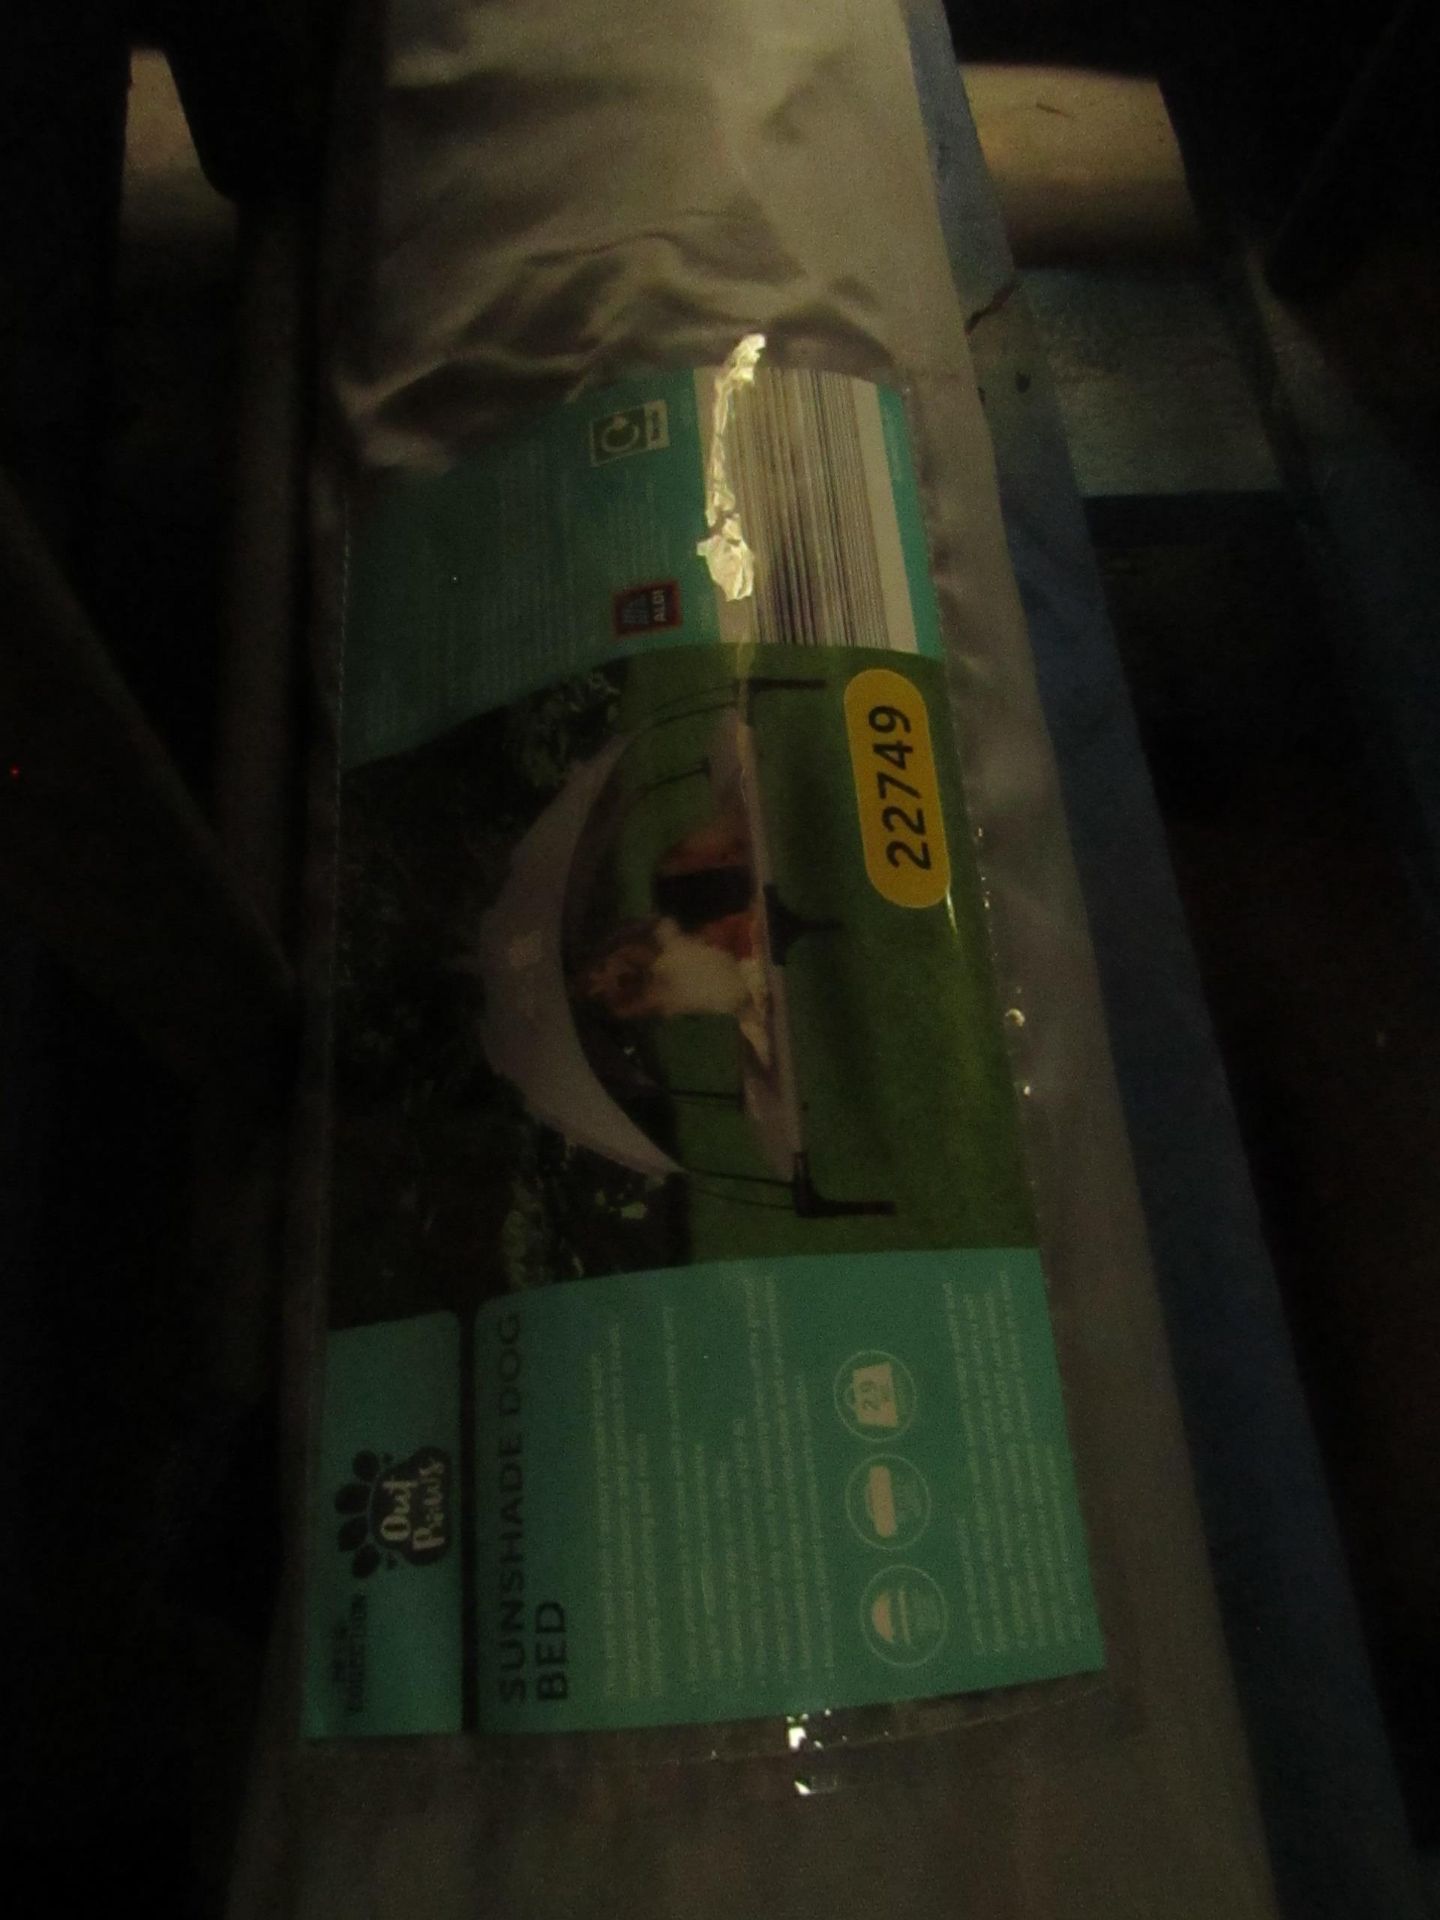 Sun shade dog bed, unchecked in packaging